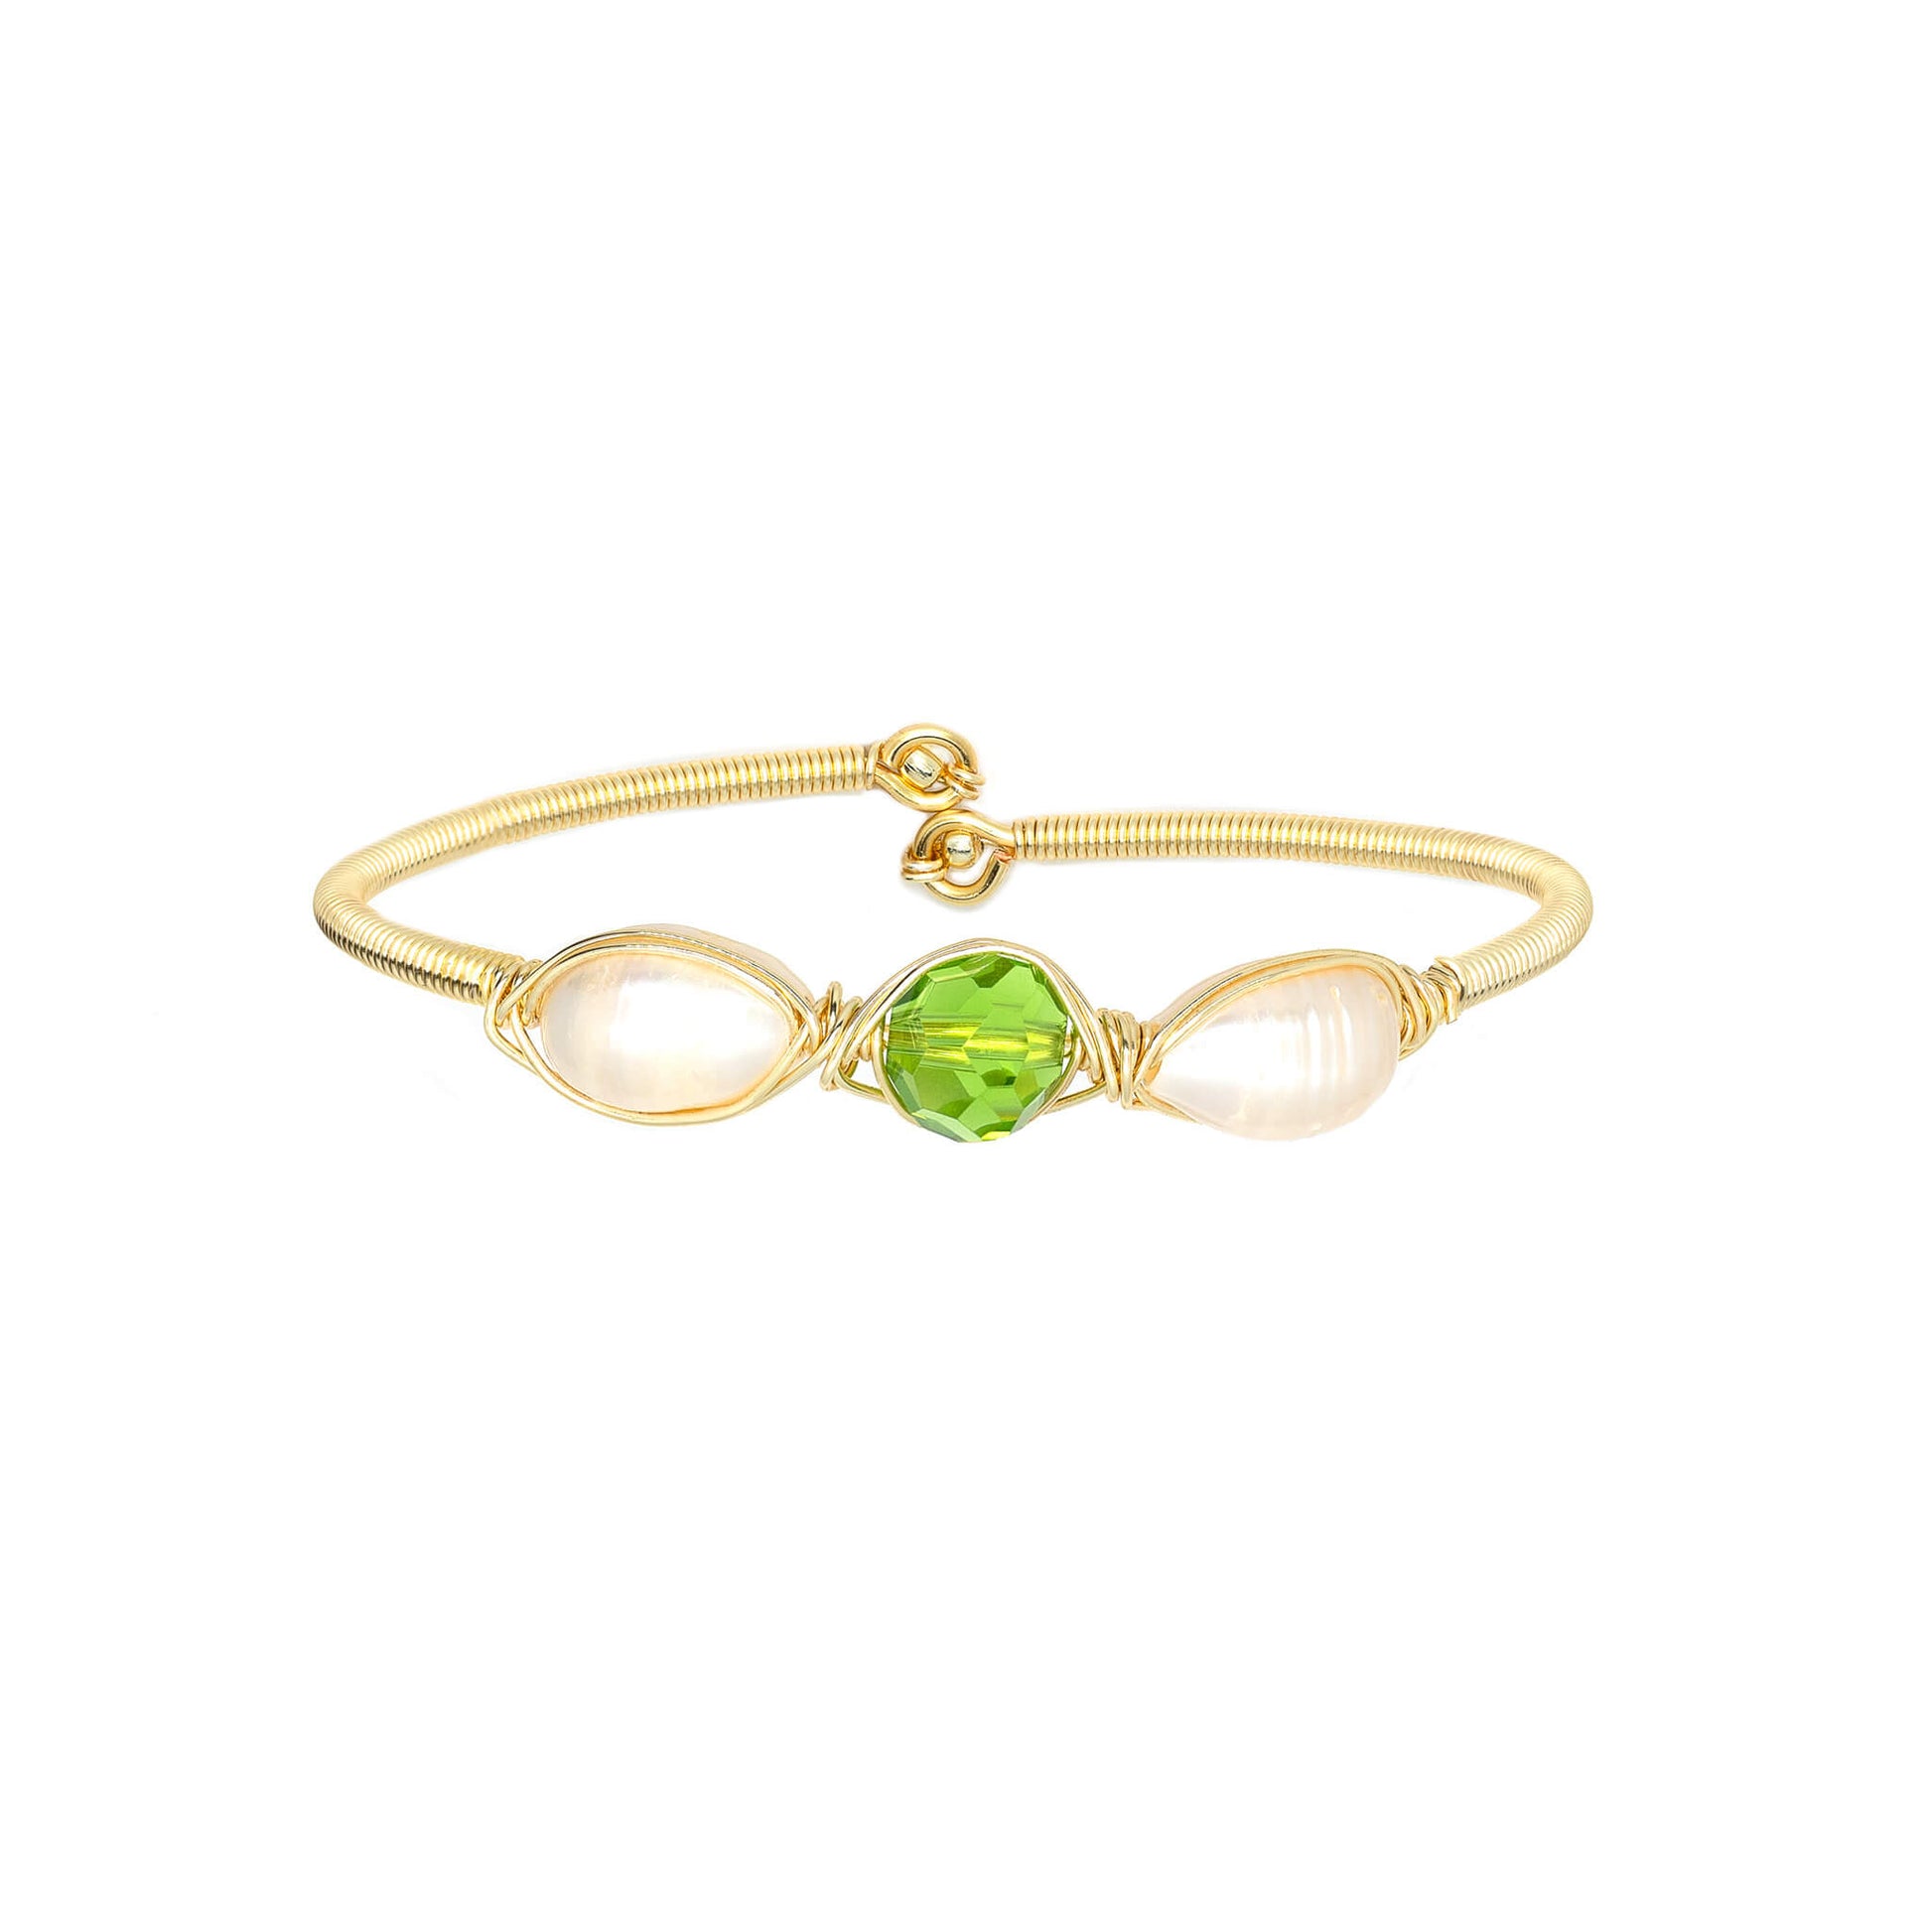 August Birthstone Crystal Gold Bracelet. Light Green Crystal, Fresh Water Pearls  and Non tarnish Gold color wire. Wire Wrapped Bracelet.